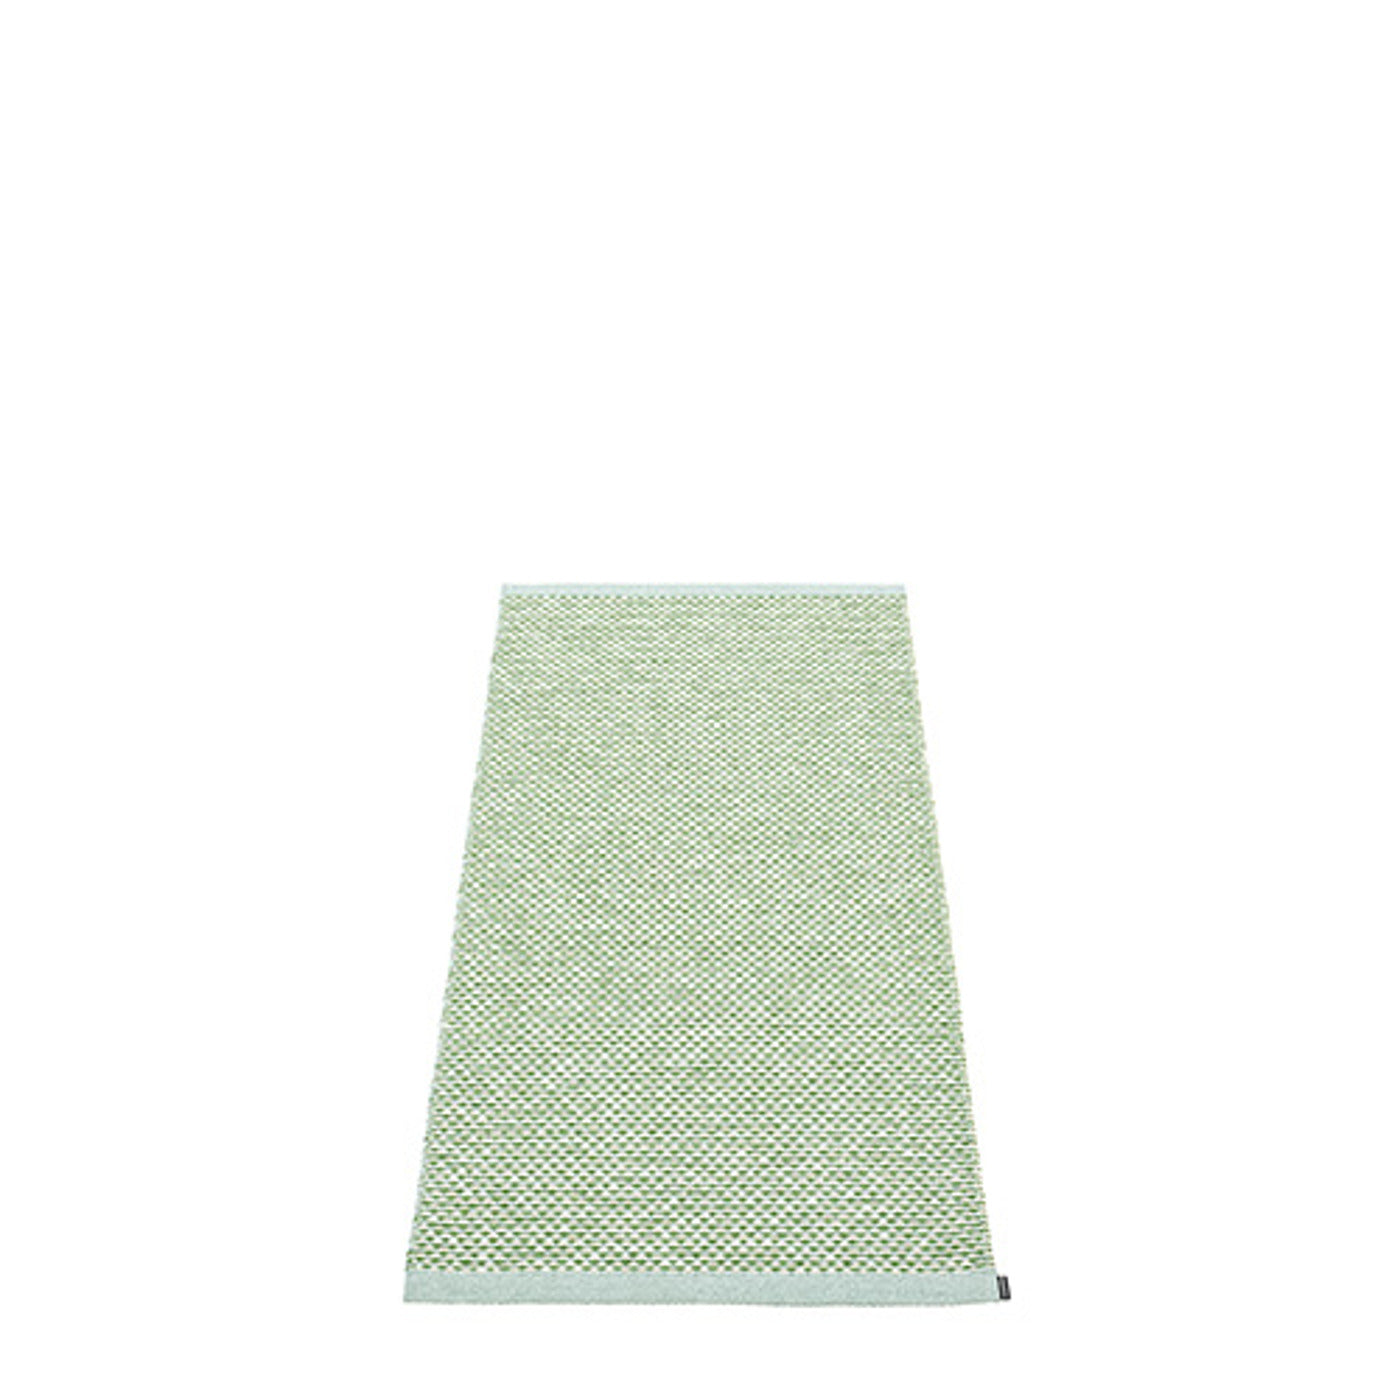 All sizes EFFI RUG - PALE TURQUOISE/GRASS GREEN/VANILLA